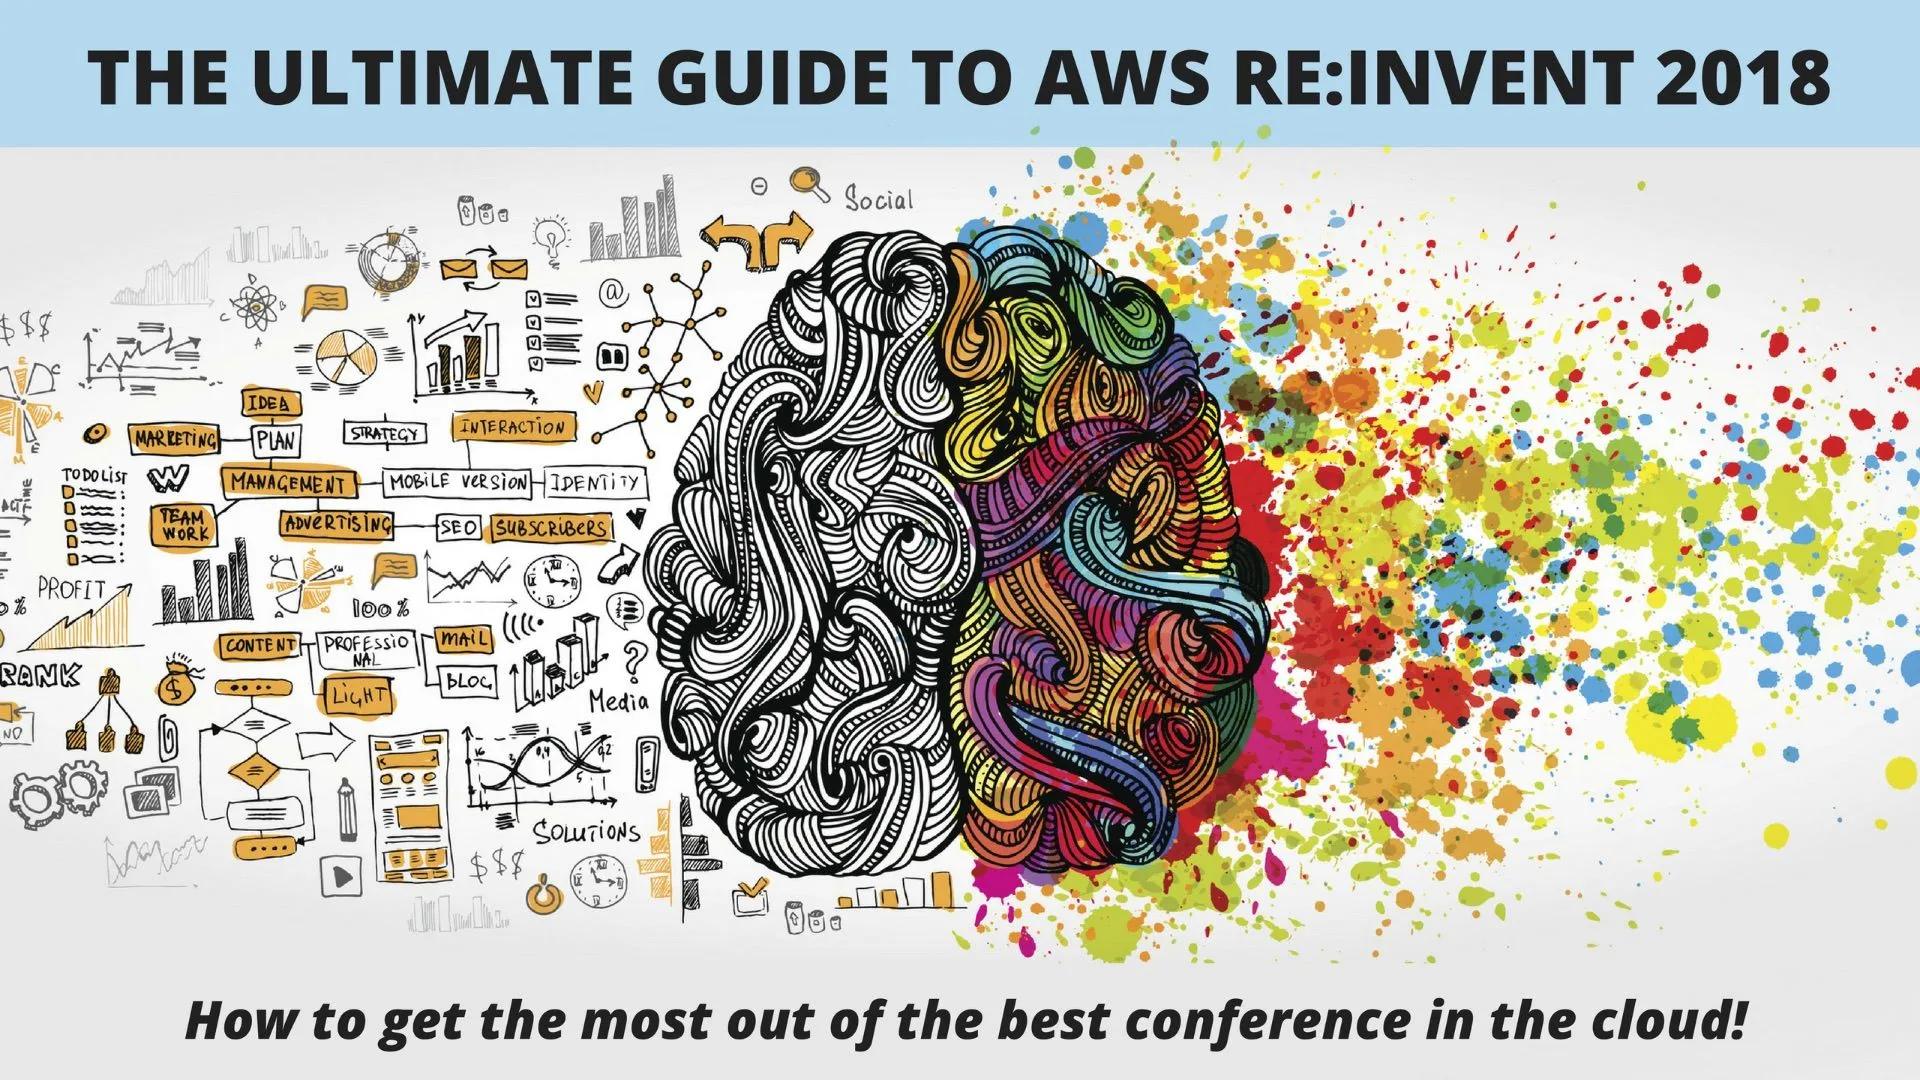 The Ultimate Guide to AWS re:Invent 2018